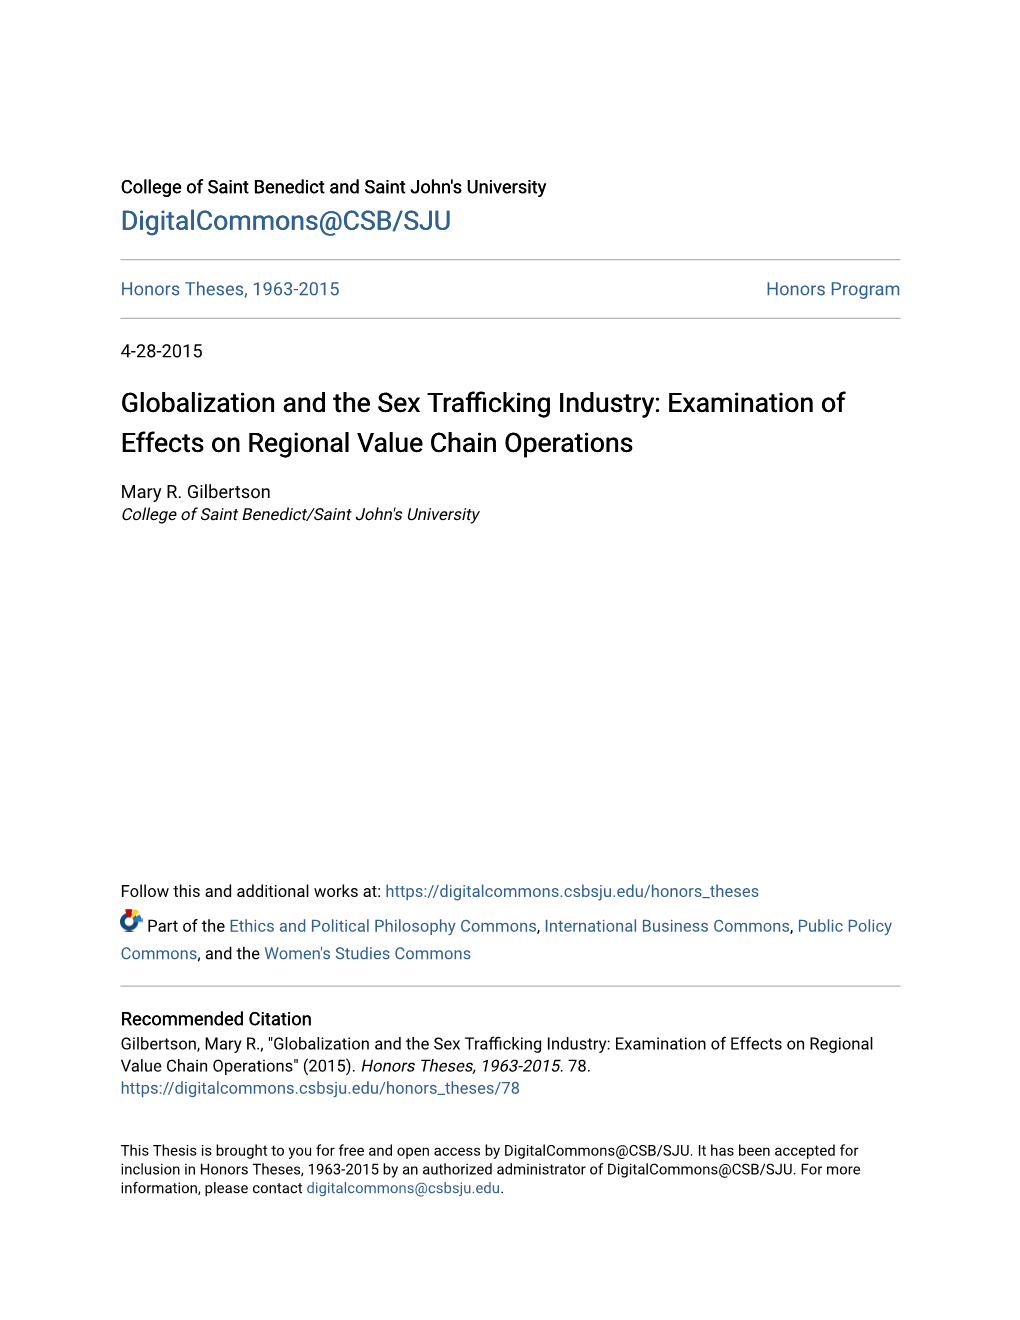 Globalization and the Sex Trafficking Industry: Examination of Effects on Regional Value Chain Operations